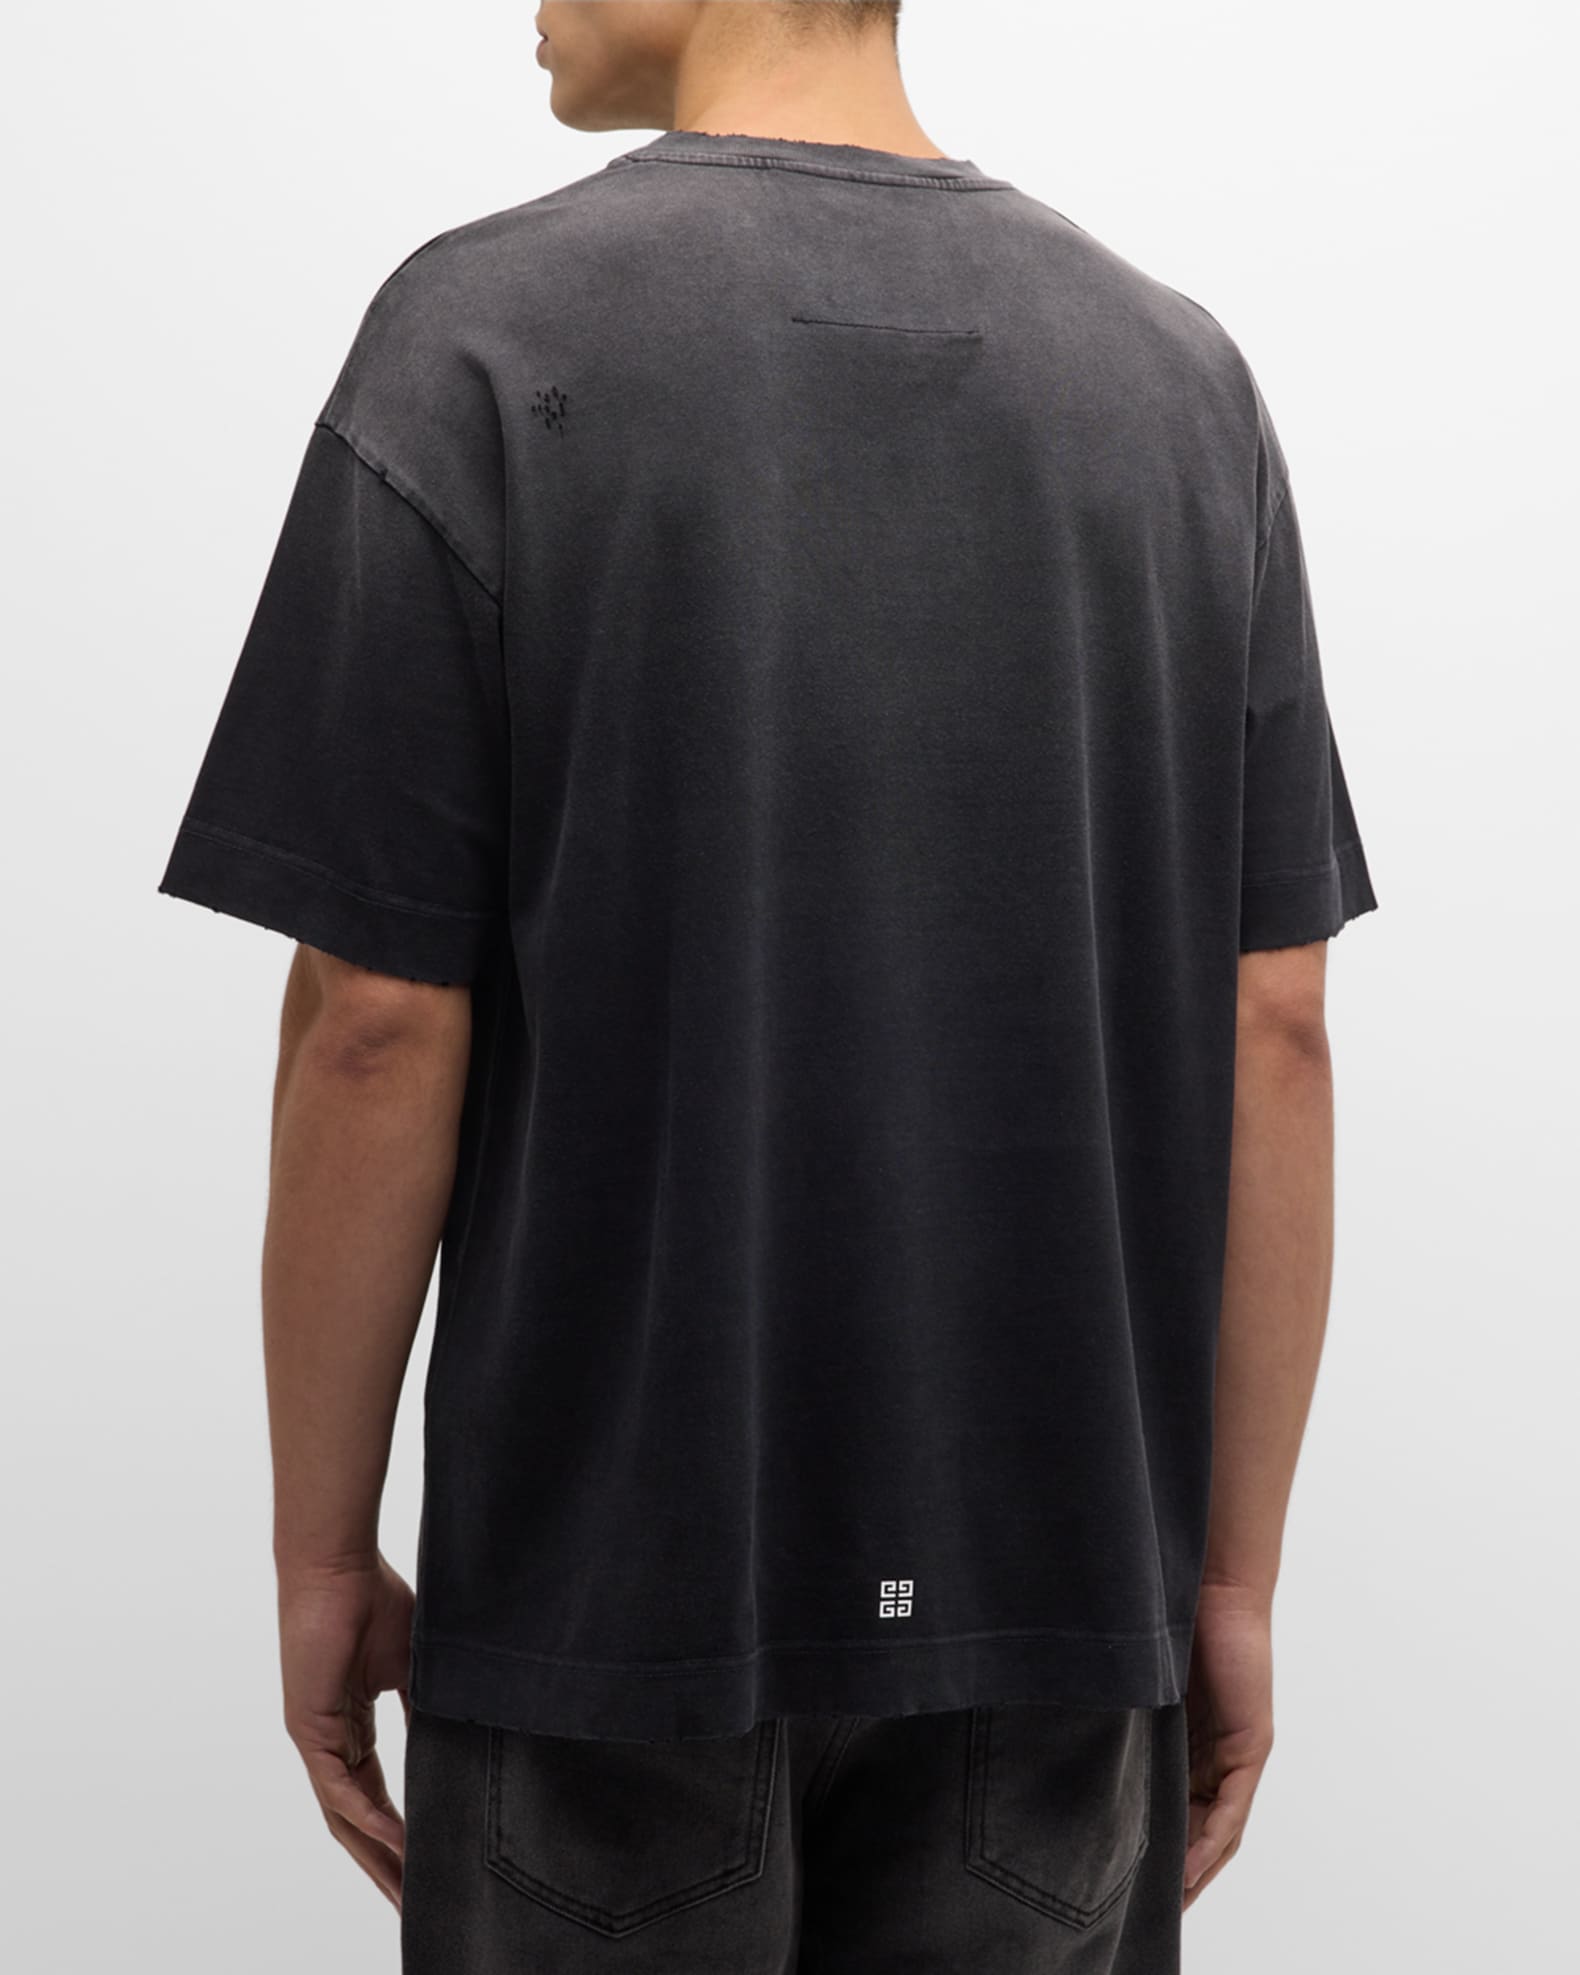 Givenchy Men's Distressed Graphic T-Shirt | Neiman Marcus